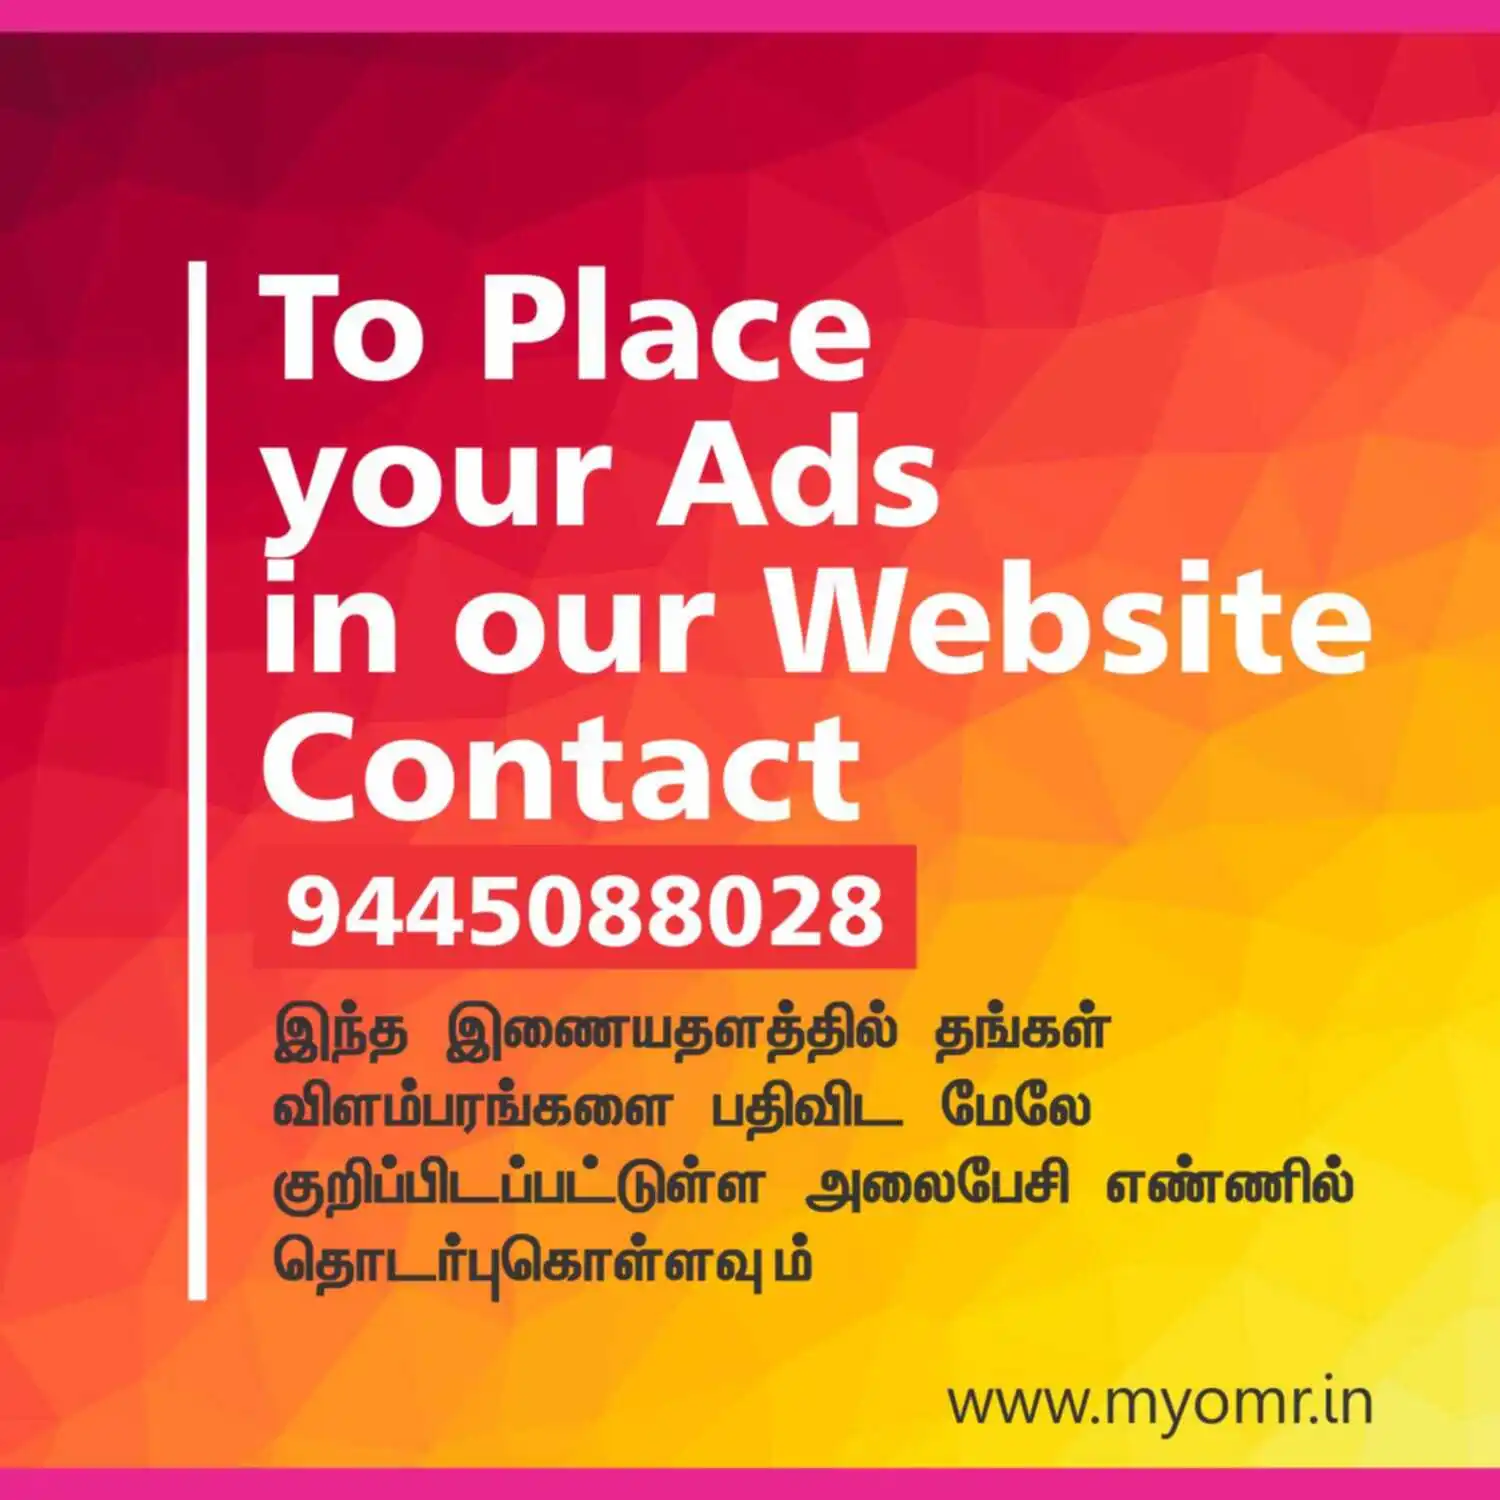 Place your Local Ads to promote your business in OMR Road, Use our Business connect platform for exclusive local response